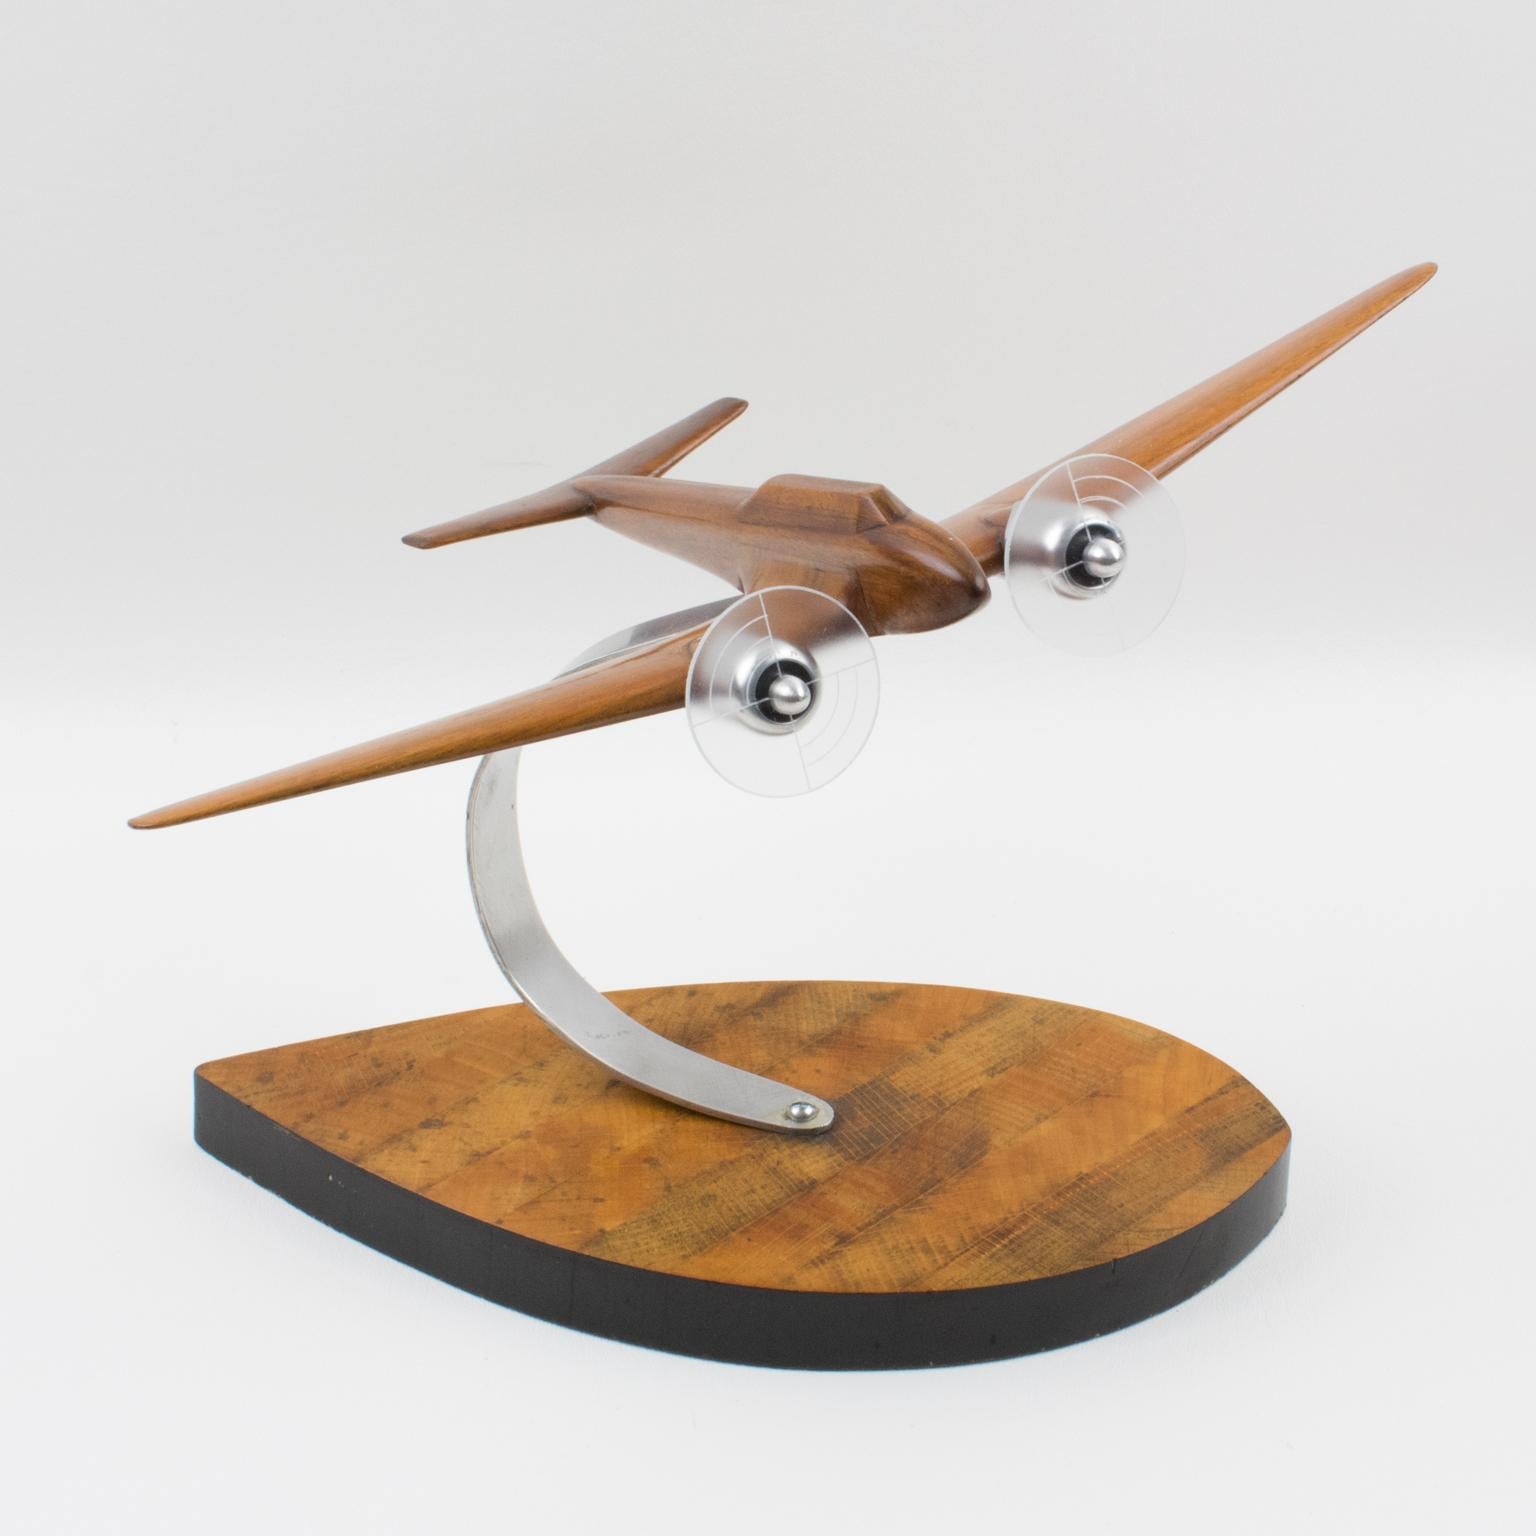 French Art Deco, 1940s Wooden and Aluminum Airplane Aviation Model 3